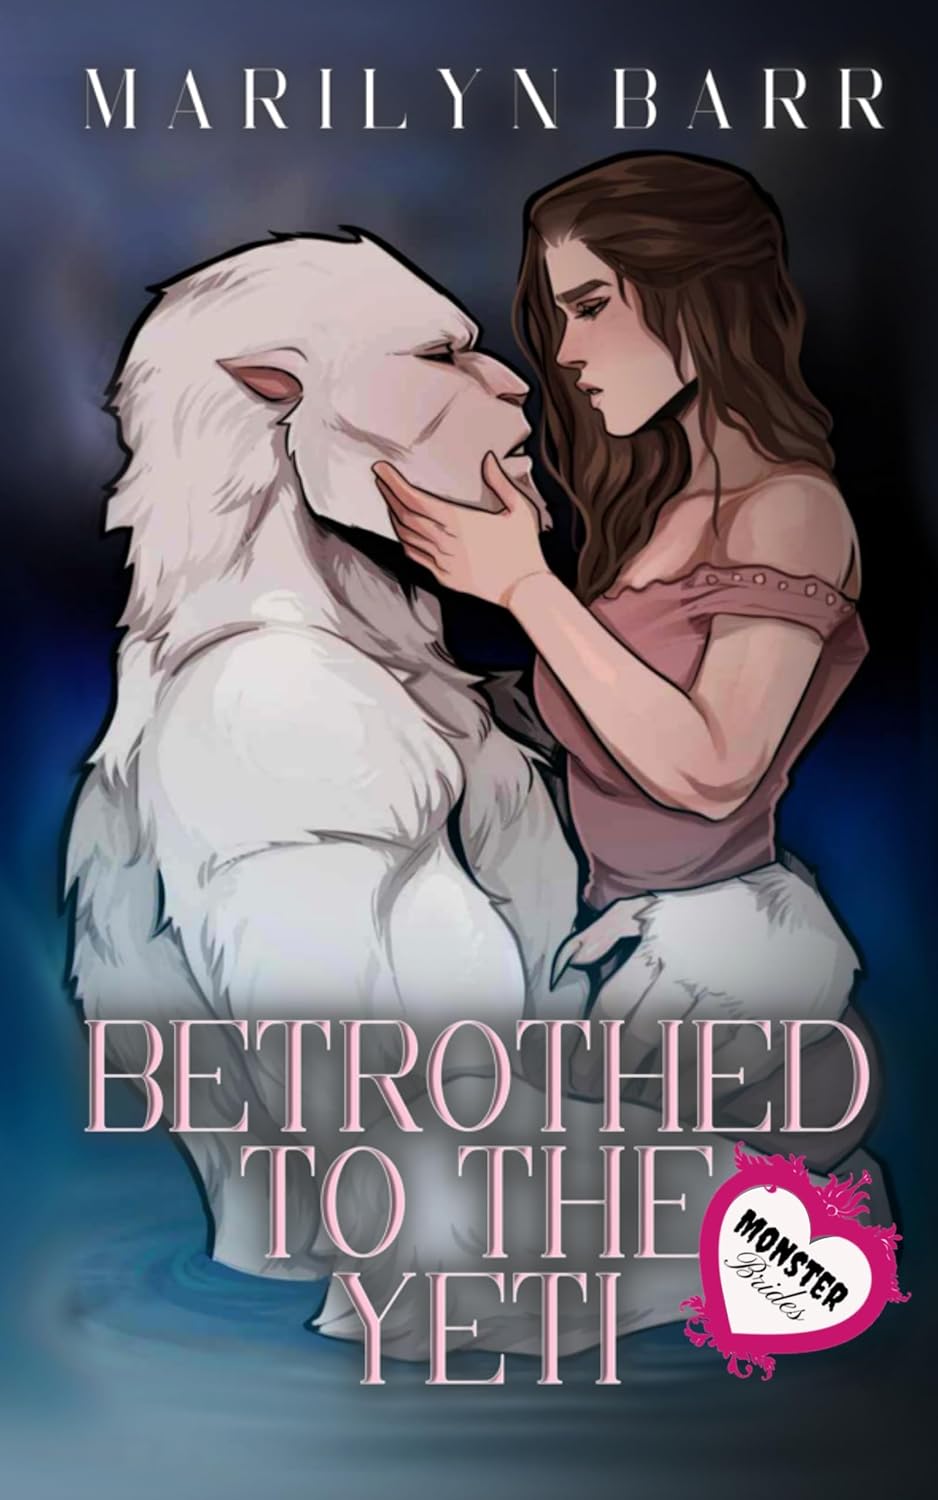 Betrothed to the Yeti by Marilyn Barr